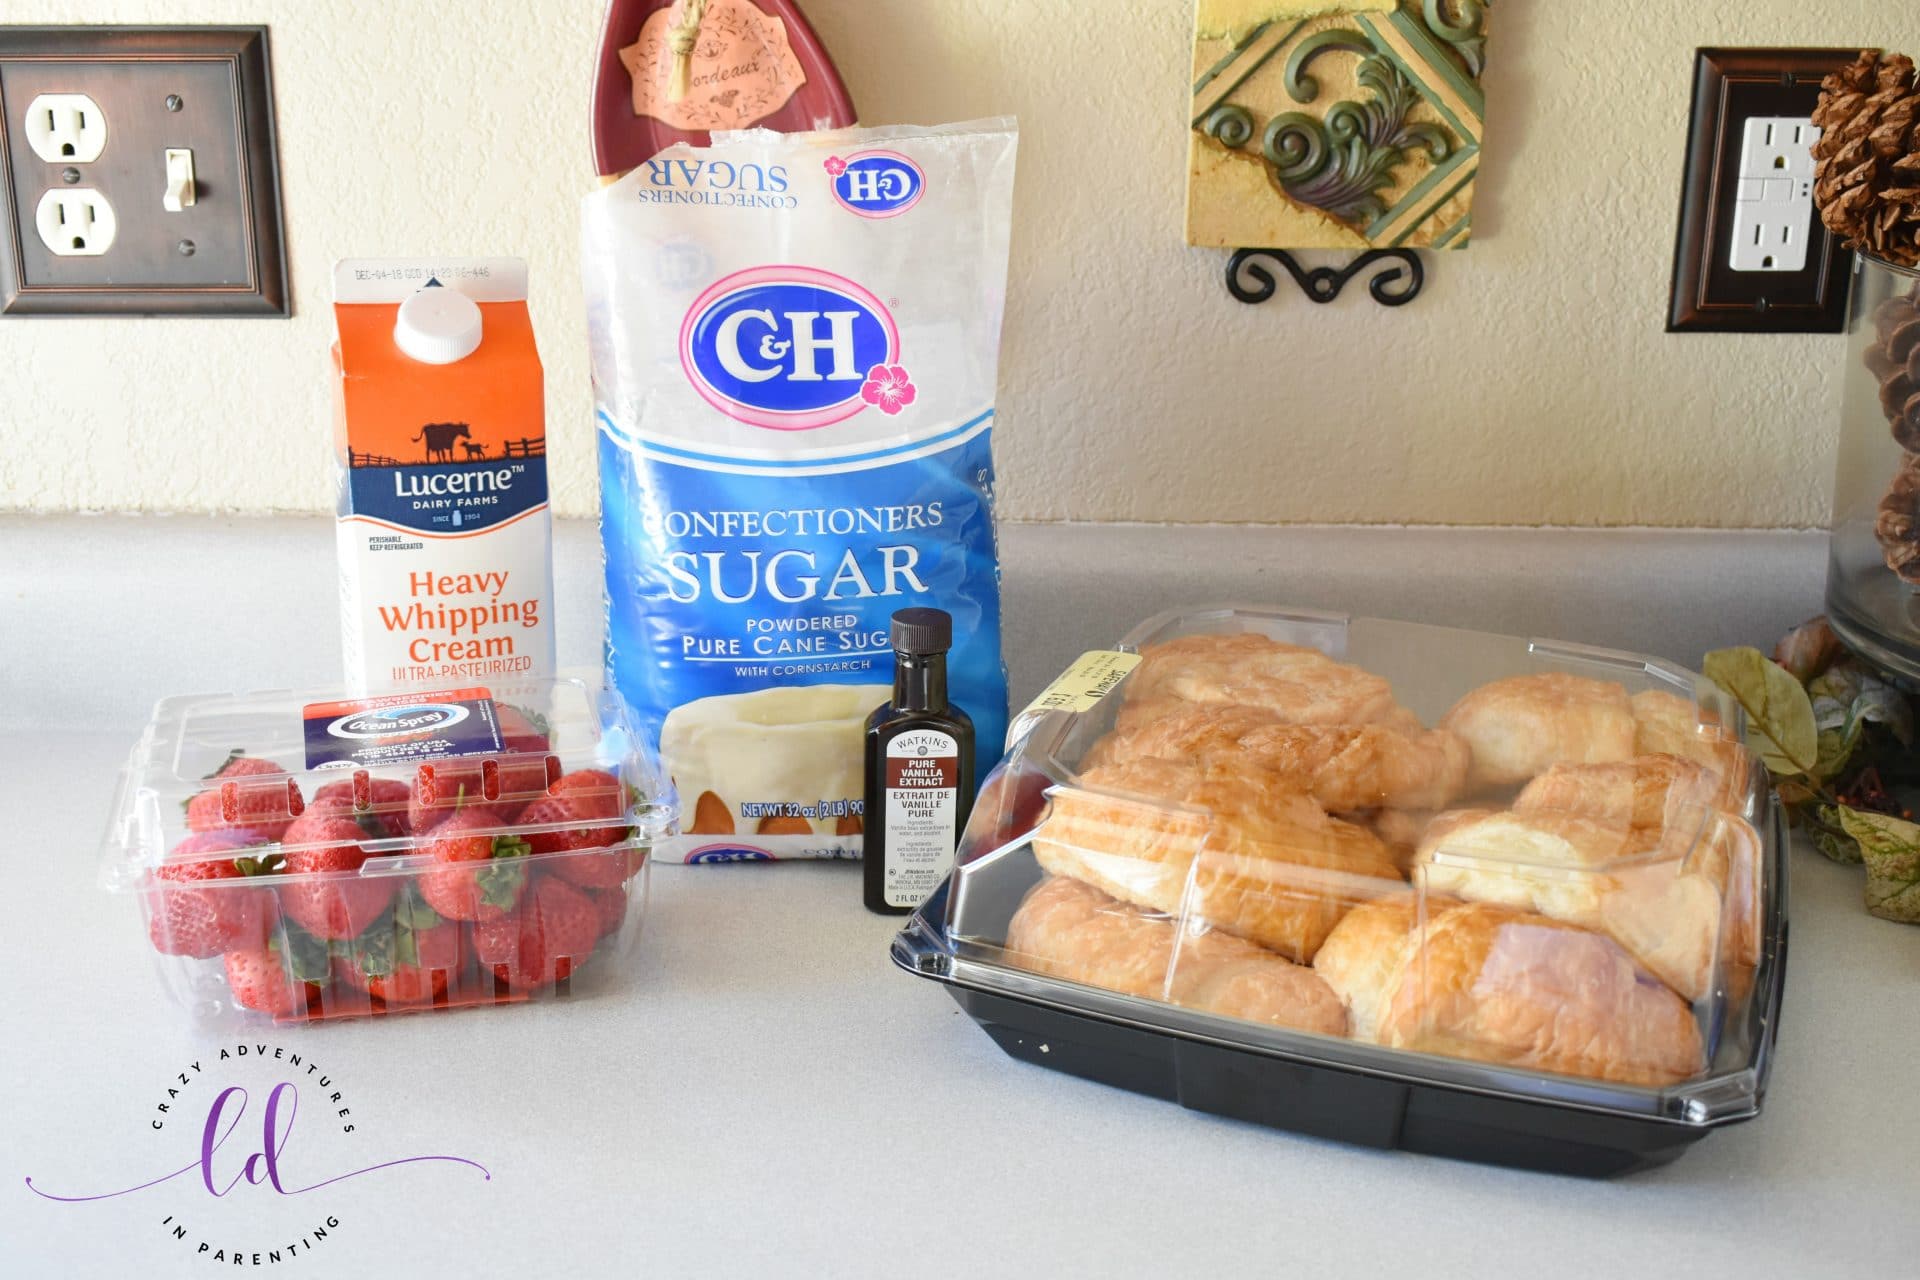 Ingredients for Strawberry Shortcake Croissants with Homemade Whipped Cream